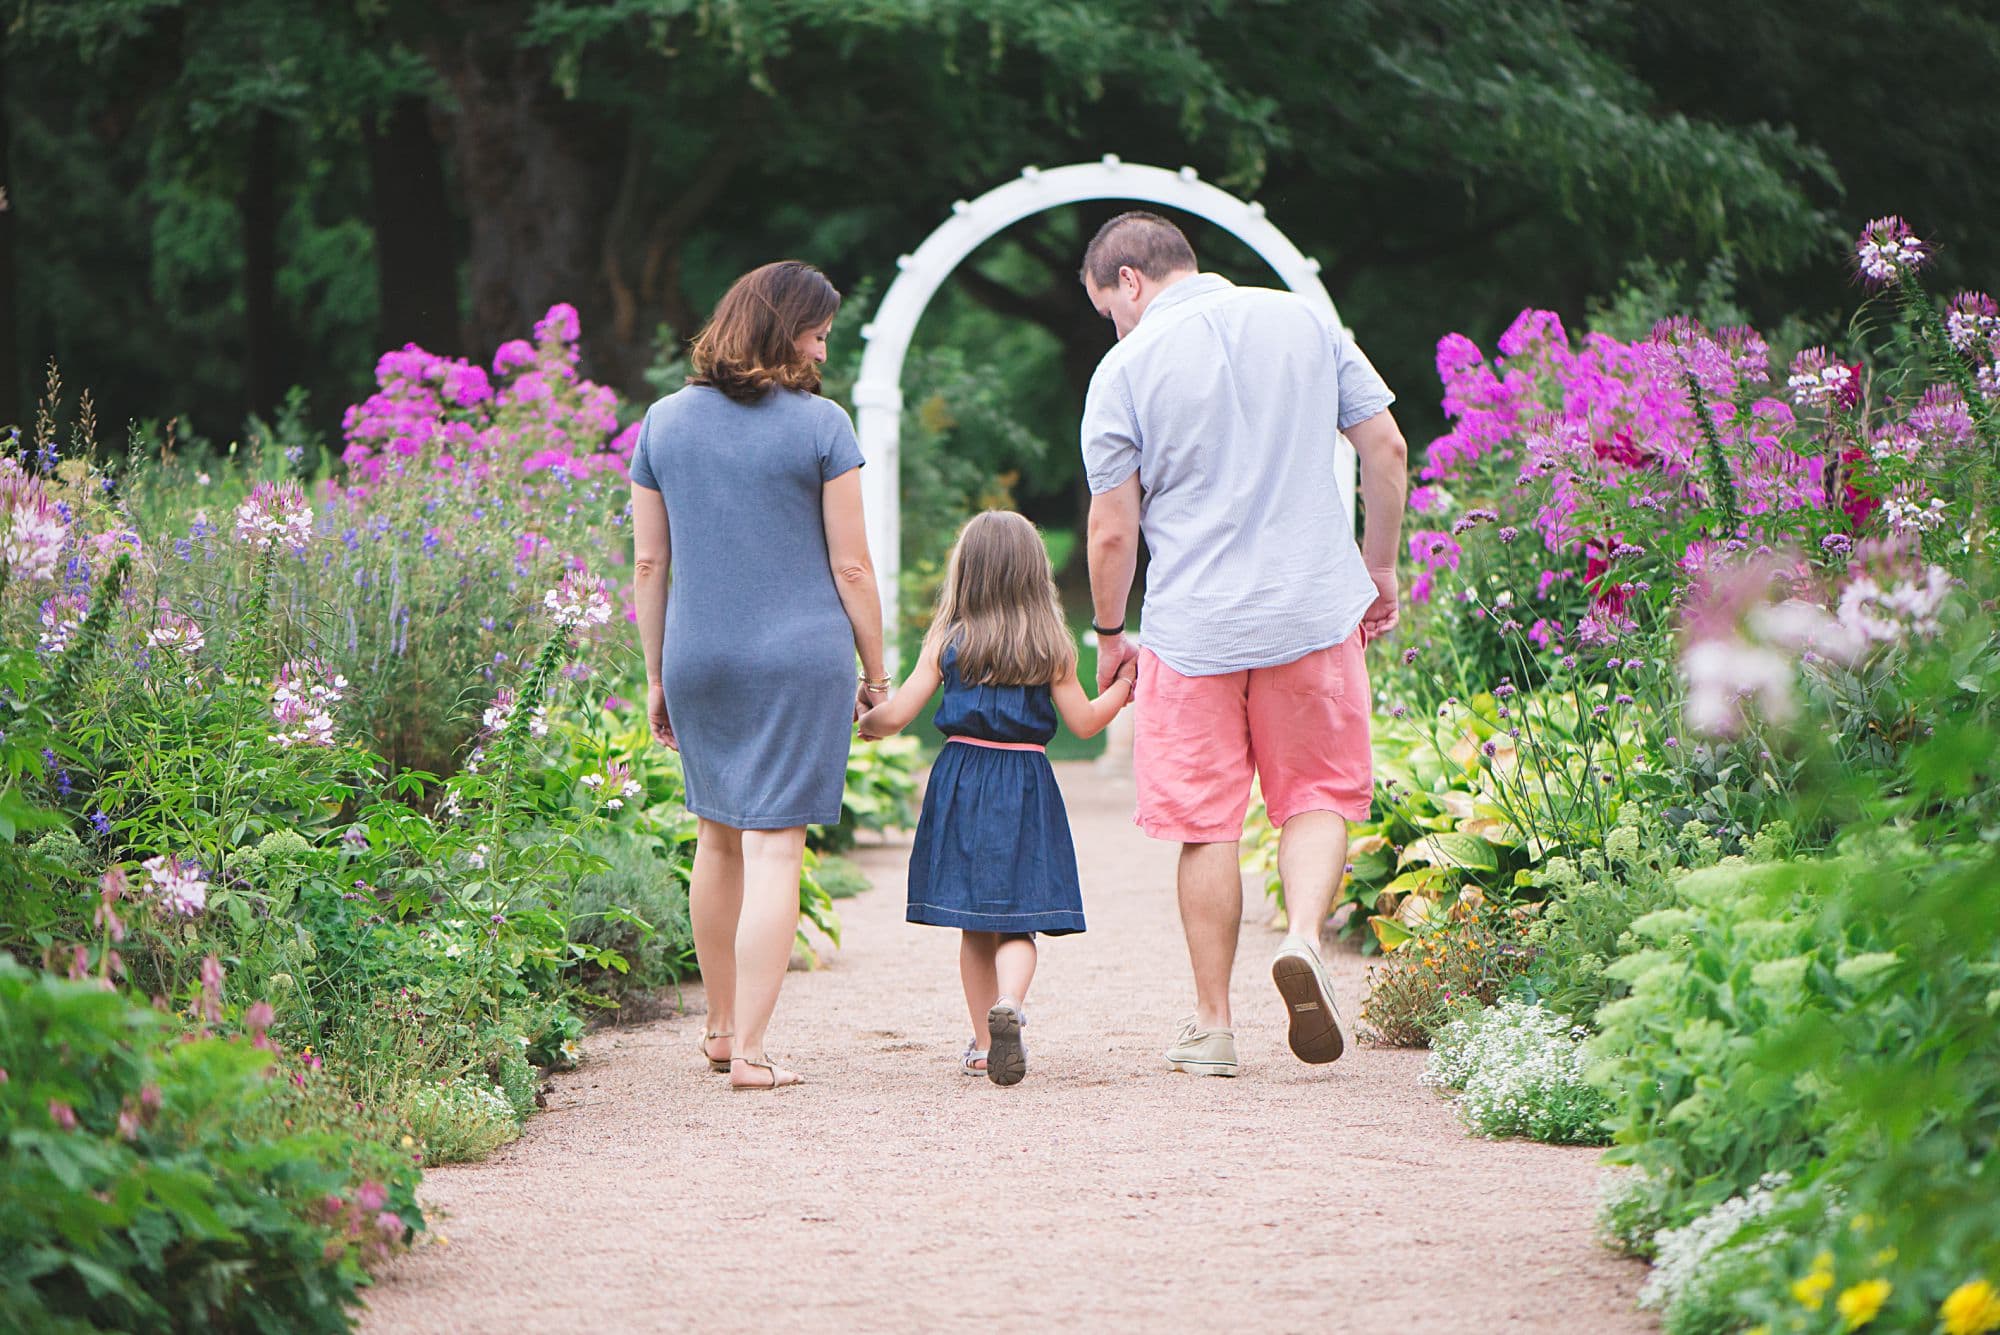 Family walking away through a garden with pink flowers, wearing blue dresses and salmon shorts